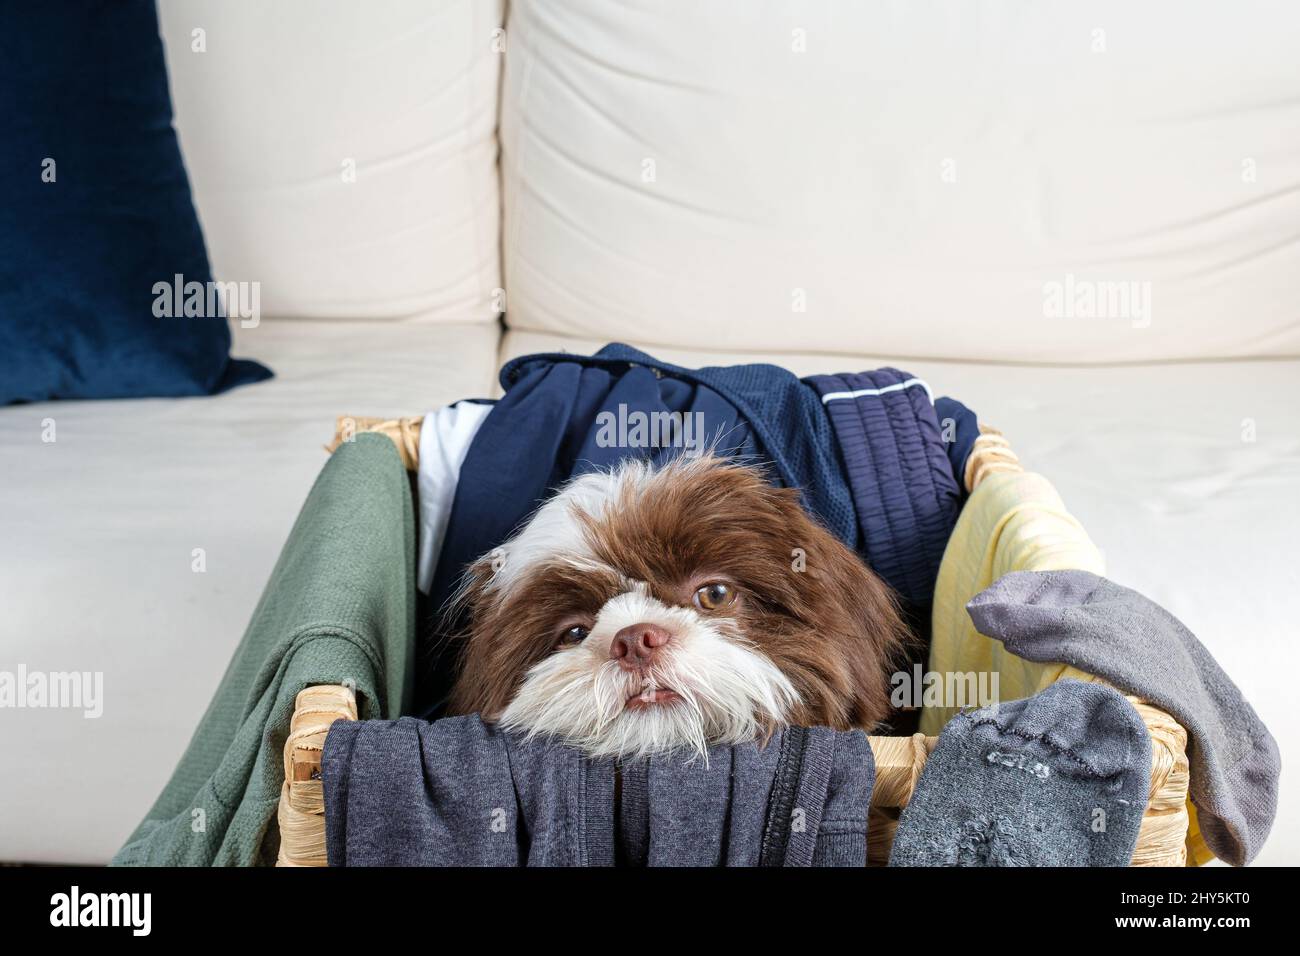 Shih tzu puppy waking up inside a laundry basket and staring at the camera side view. Stock Photo